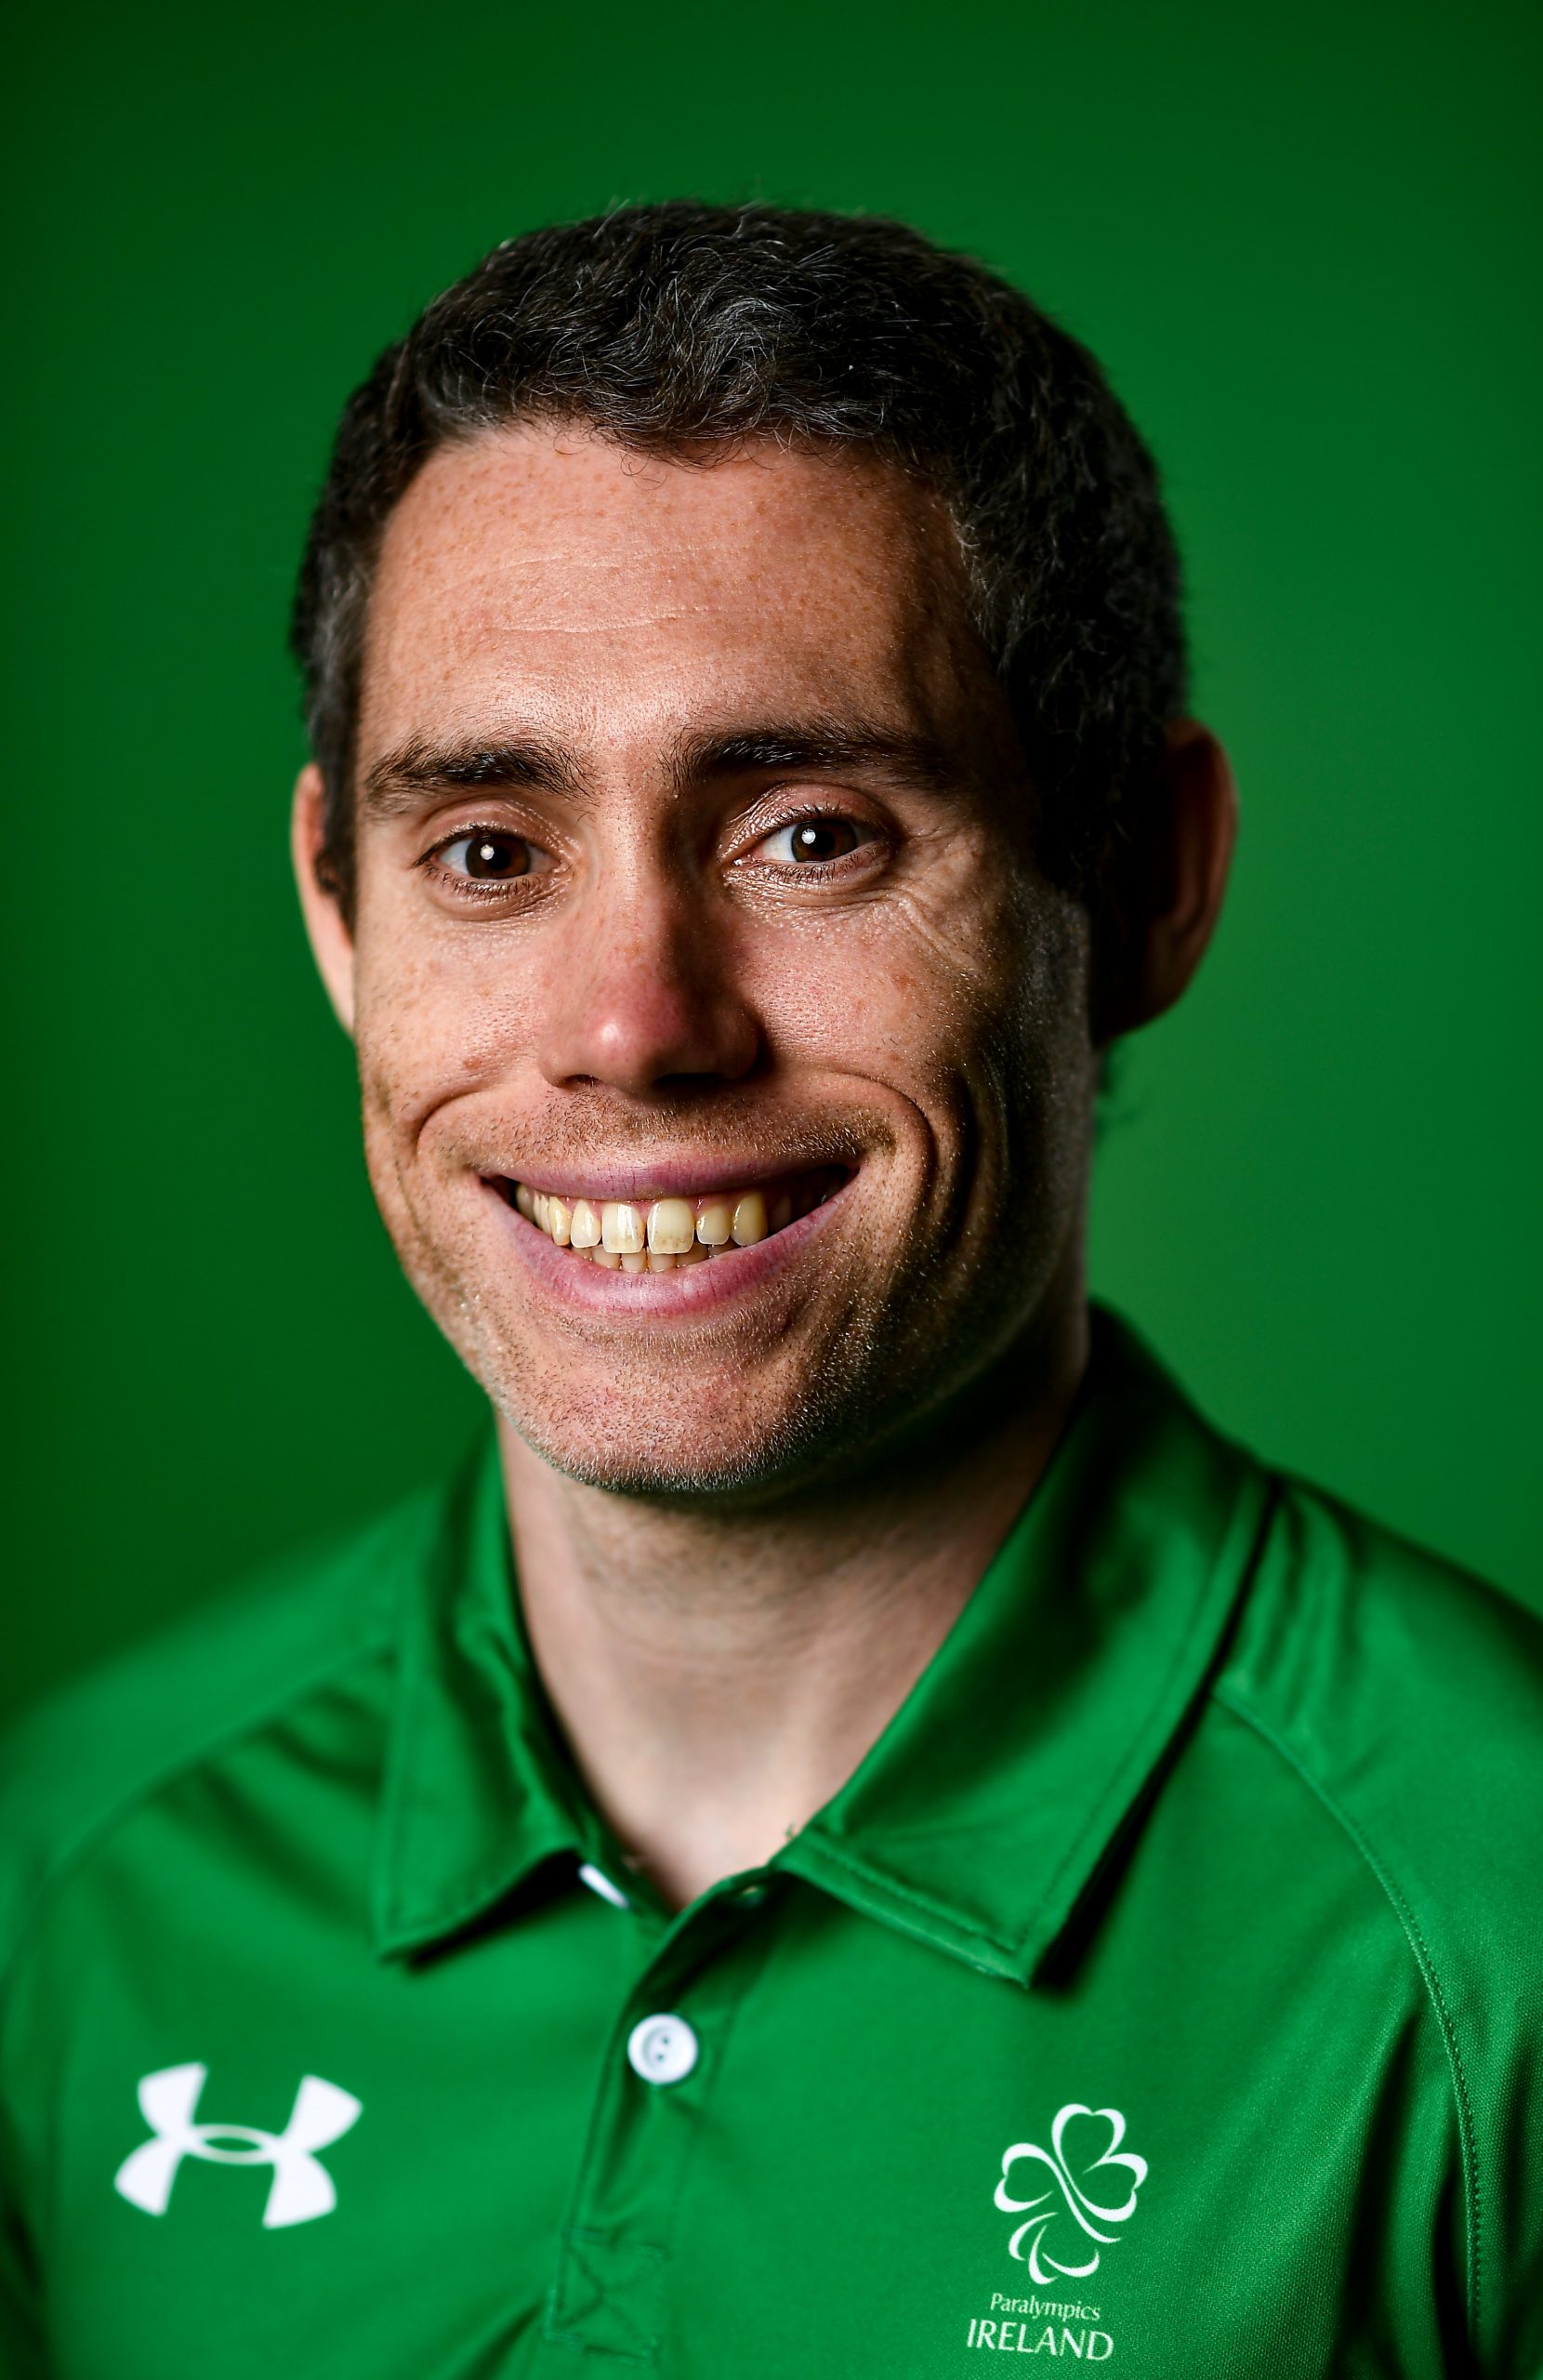 9 August 2021; Paralympics Ireland have announced the 8 Athletes that will represent Team Ireland in Athletics. The team includes Jason Smyth, Michael McKillop, Patrick Monahan, Orla Comerford, Niamh McCarthy, Mary Fitzgerald,  and Jordan Lee. Pictured at the announcement is Jason Smyth. Photo by David Fitzgerald/Sportsfile *** NO REPRODUCTION FEE ***